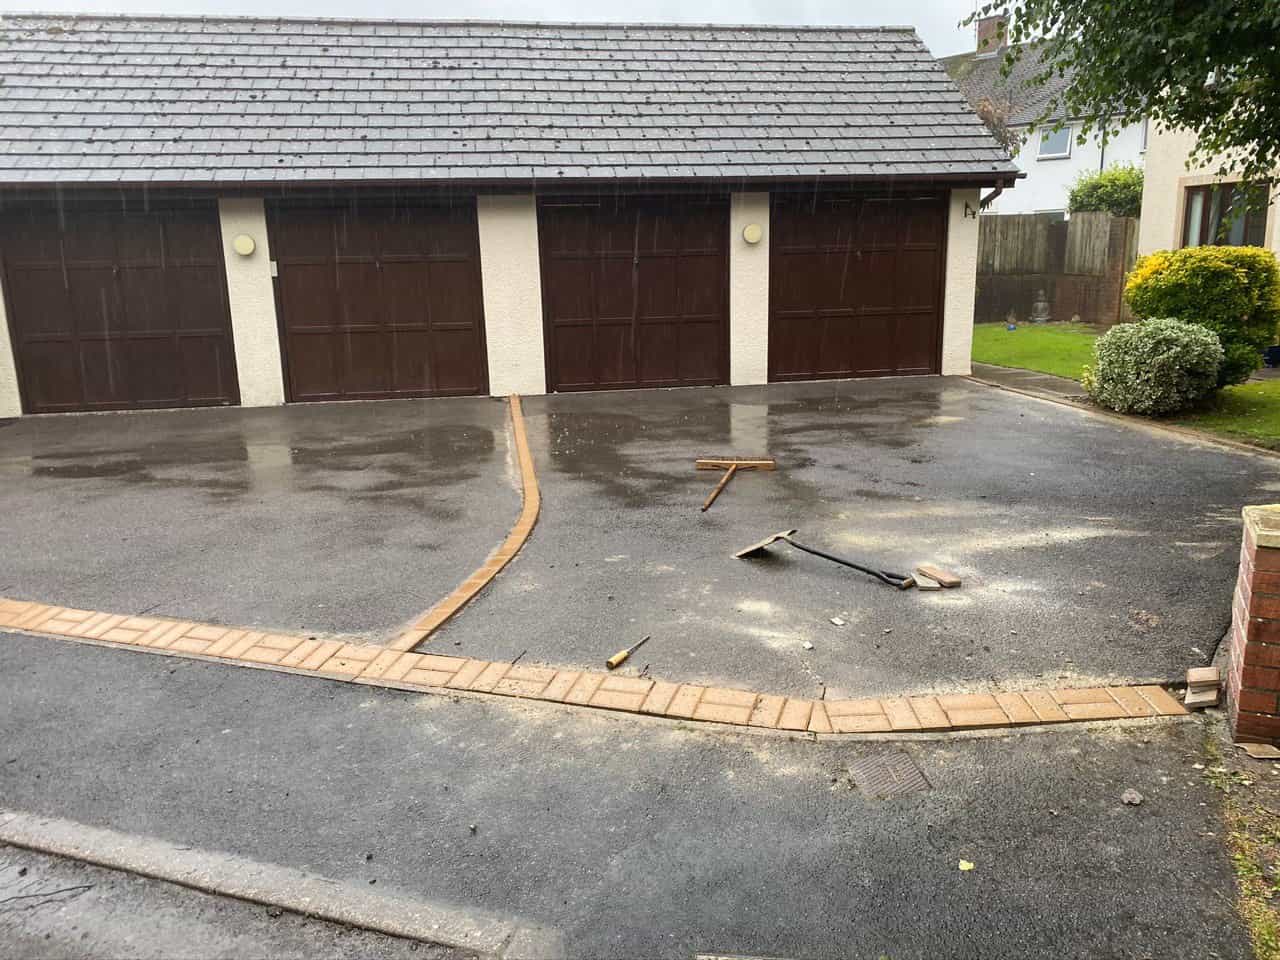 This is a photo of a resin driveway installed in Dartford, Kent by Kent Resin Drives